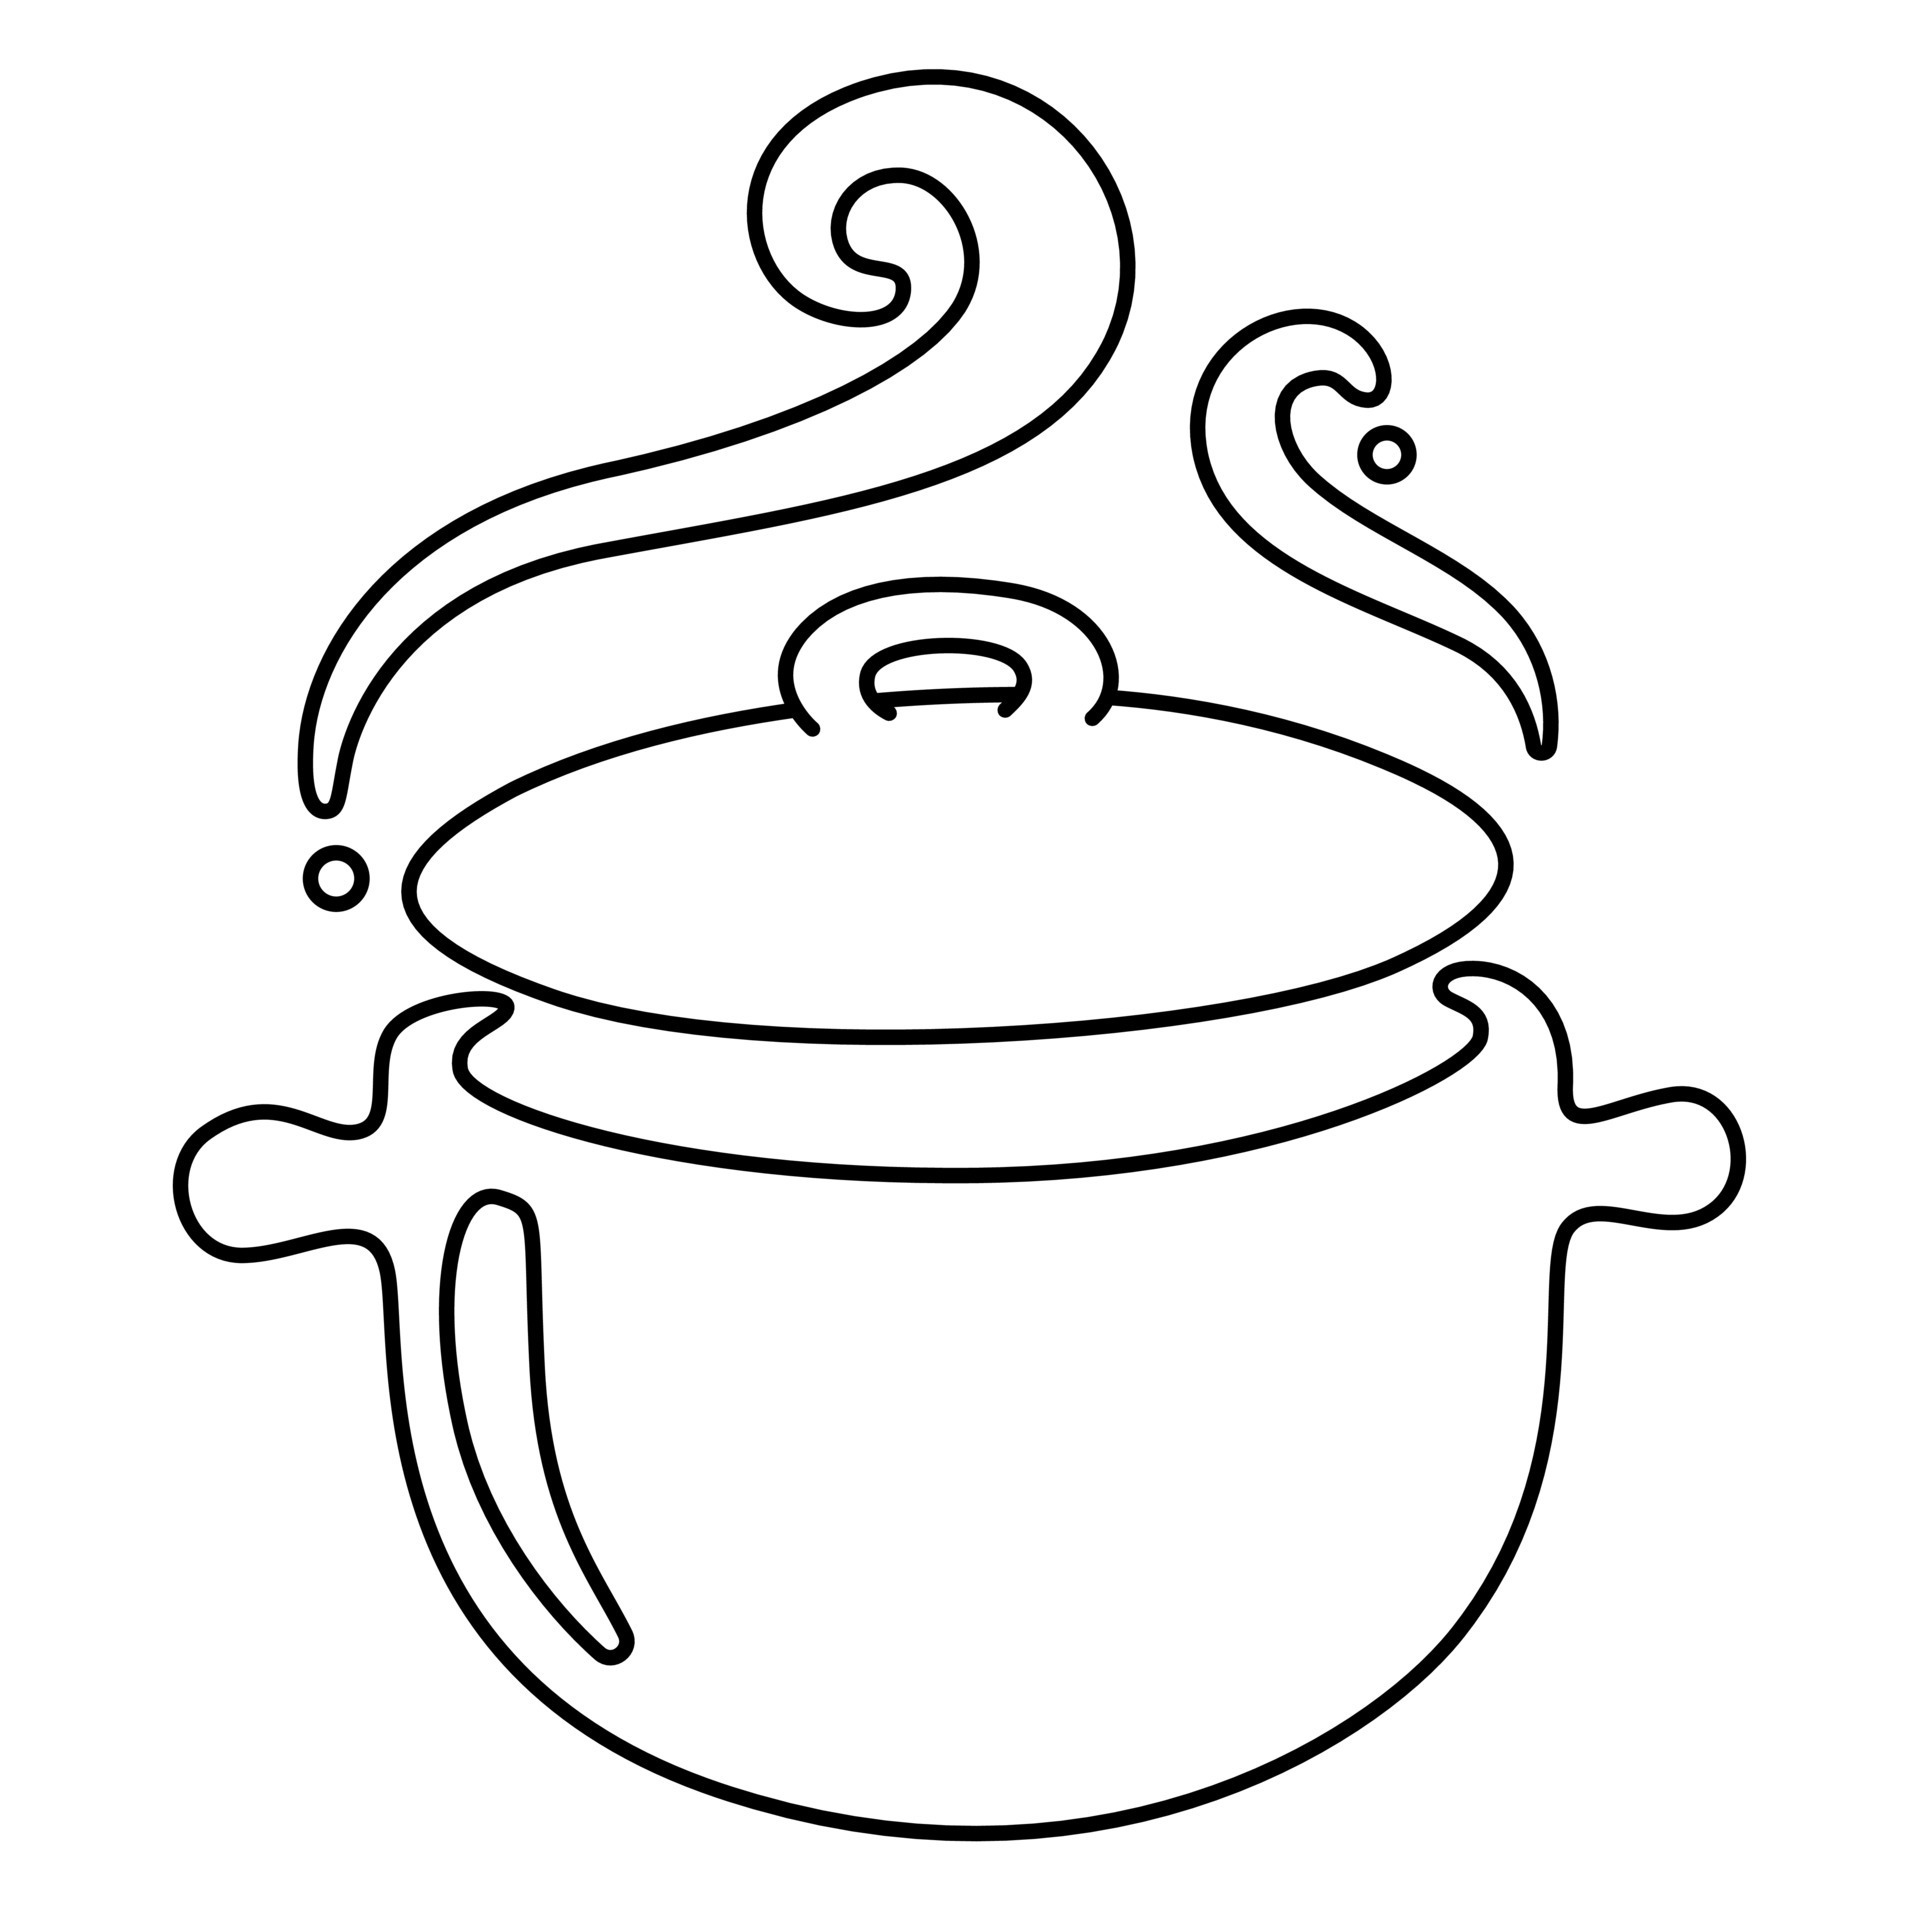 File:Illustration of a Welsh cooking pot called a Ffwrn Fach, from the book  “The First Principles of Good Cookery “by Lady Llanover, first published in  1867.jpg - Wikipedia